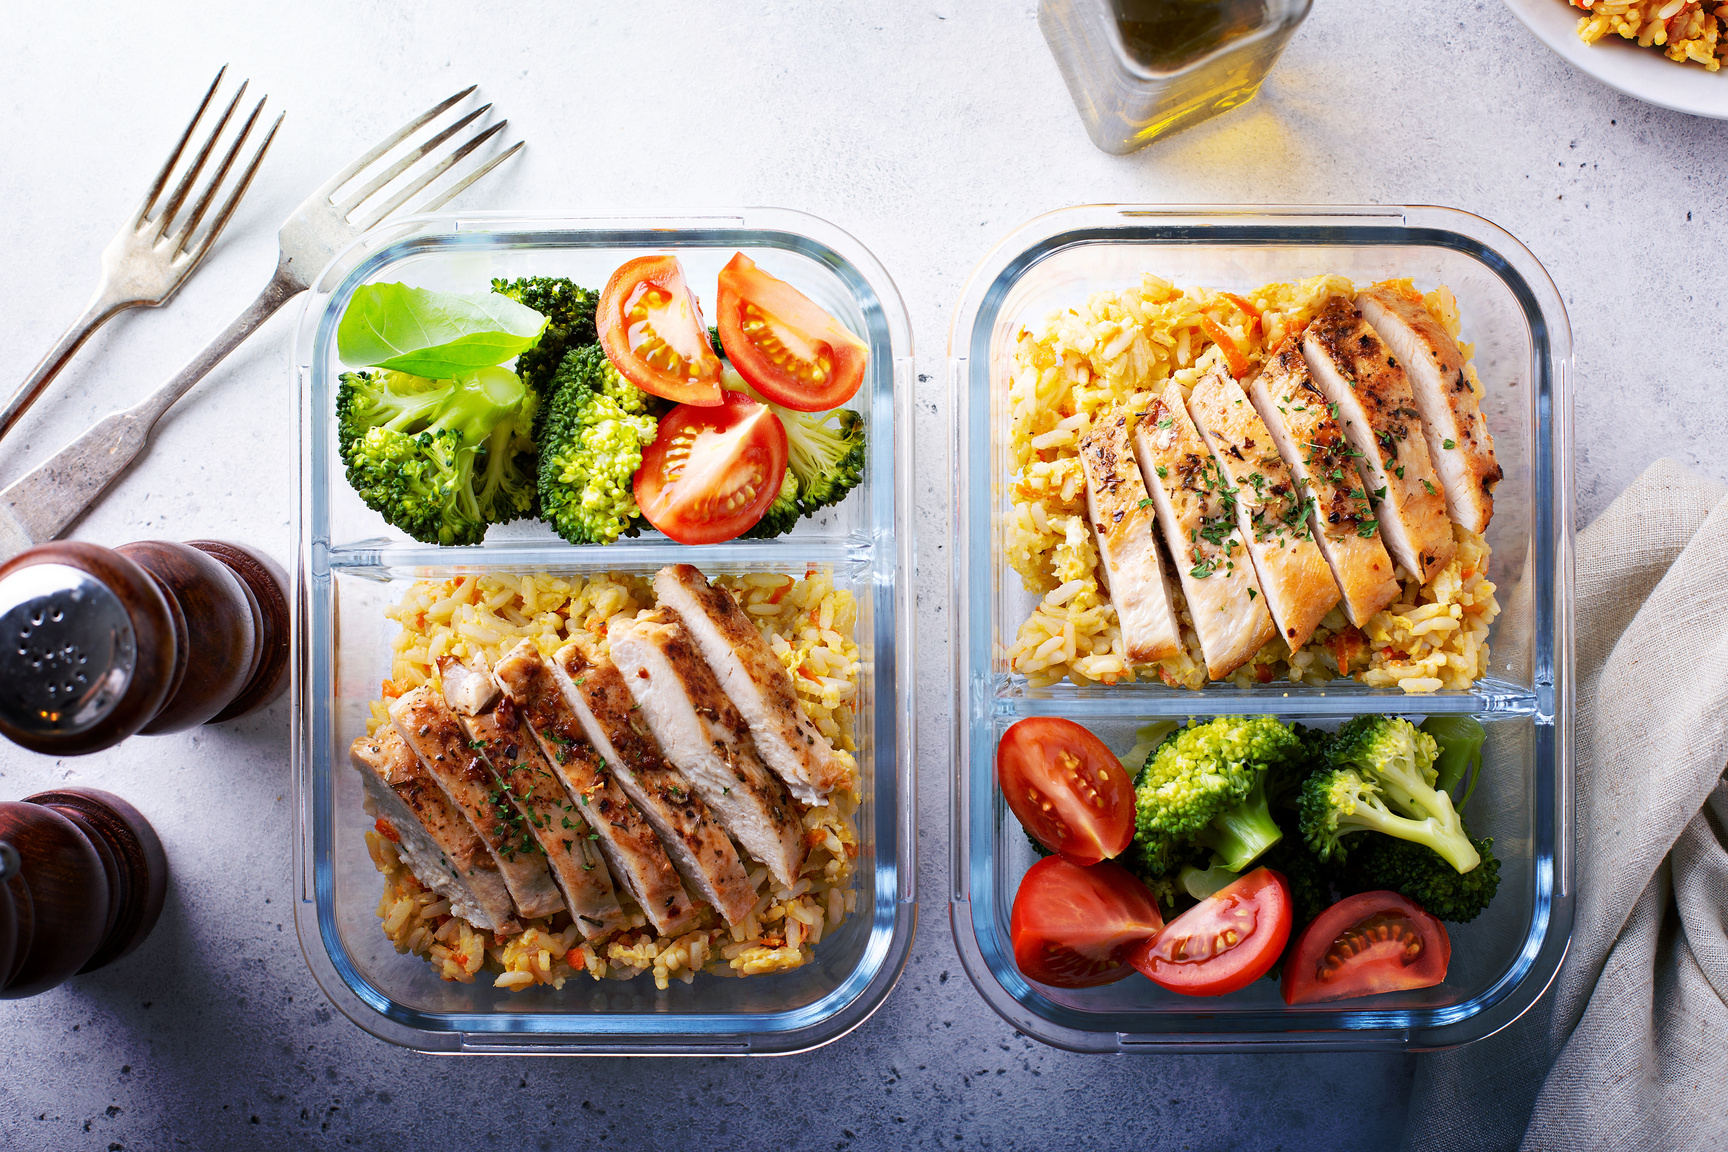 Healthy Meal Prep Containers with Chicken and Rice